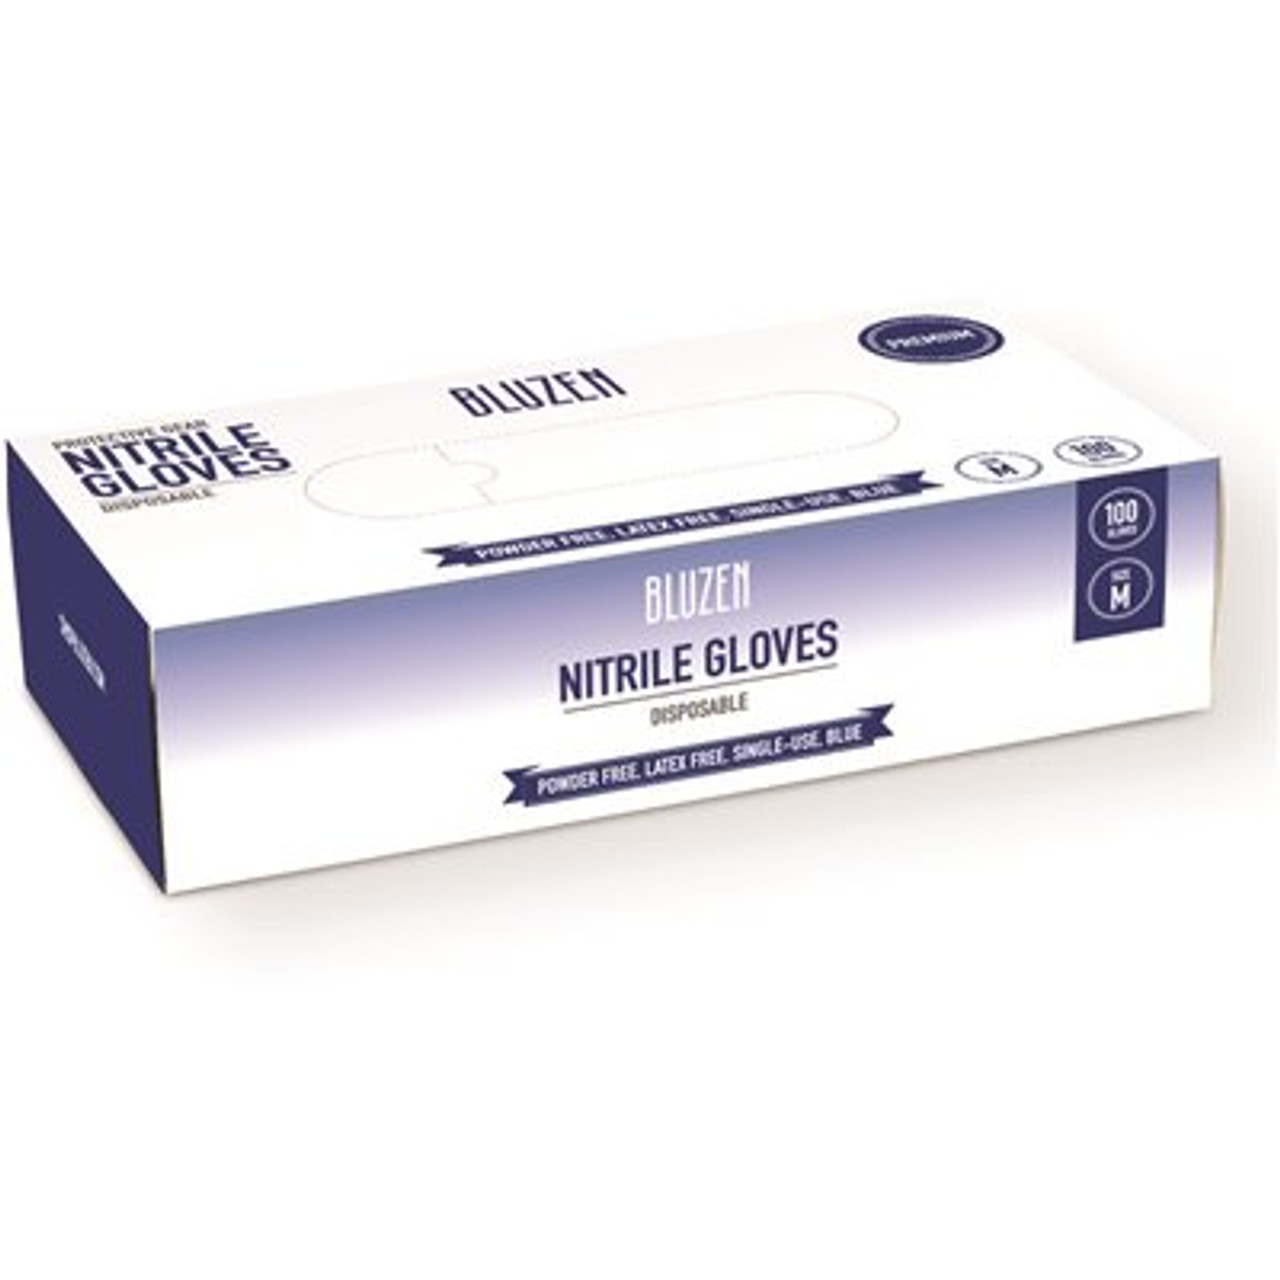 SAFETY WERCS Safety Wercs Large Black Industrial 4 Mil Nitrile Gloves (1000-Count Case)